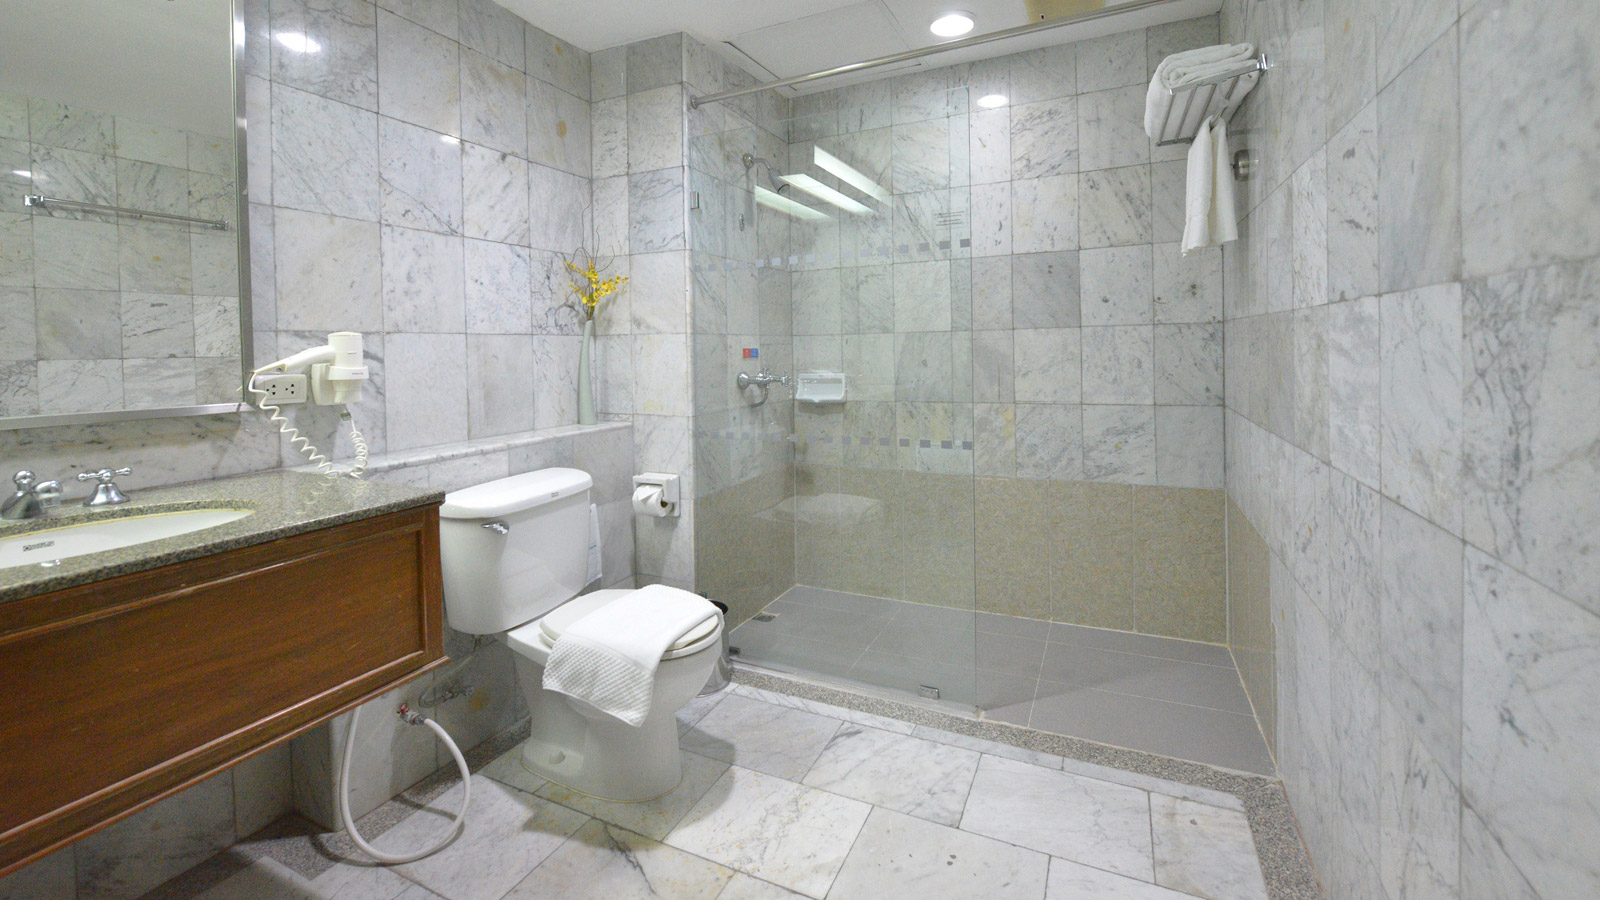 Two Bedroom Suites - Bathroom at Loei Palace Hotel - 黎府宫殿酒店